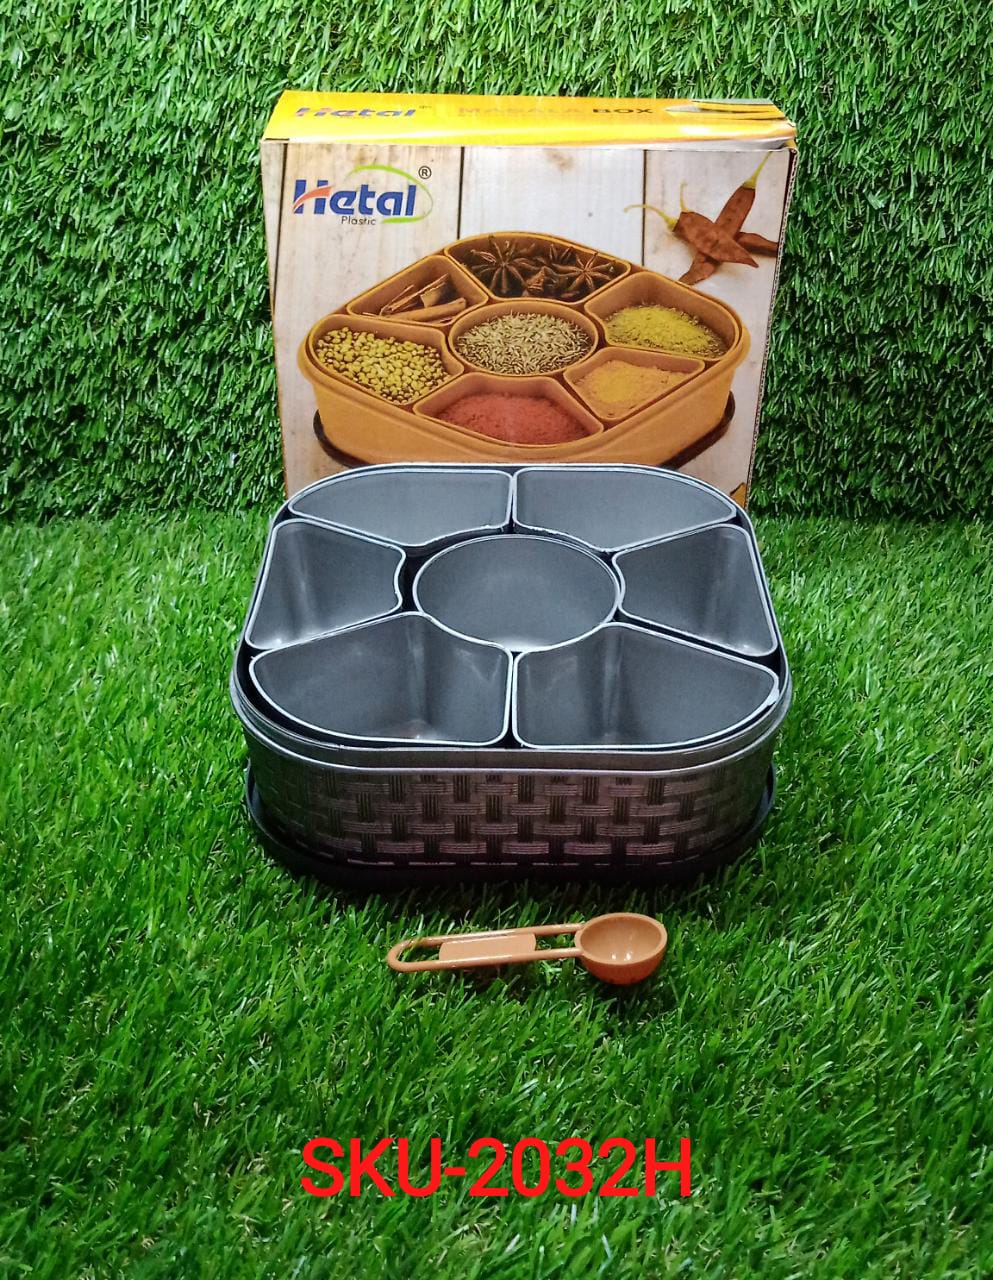 2032H Masala Box for Keeping Spices, Spice Box for Kitchen, Masala Container, Plastic Wooden Style, 7 Sections (Multi Color). DeoDap